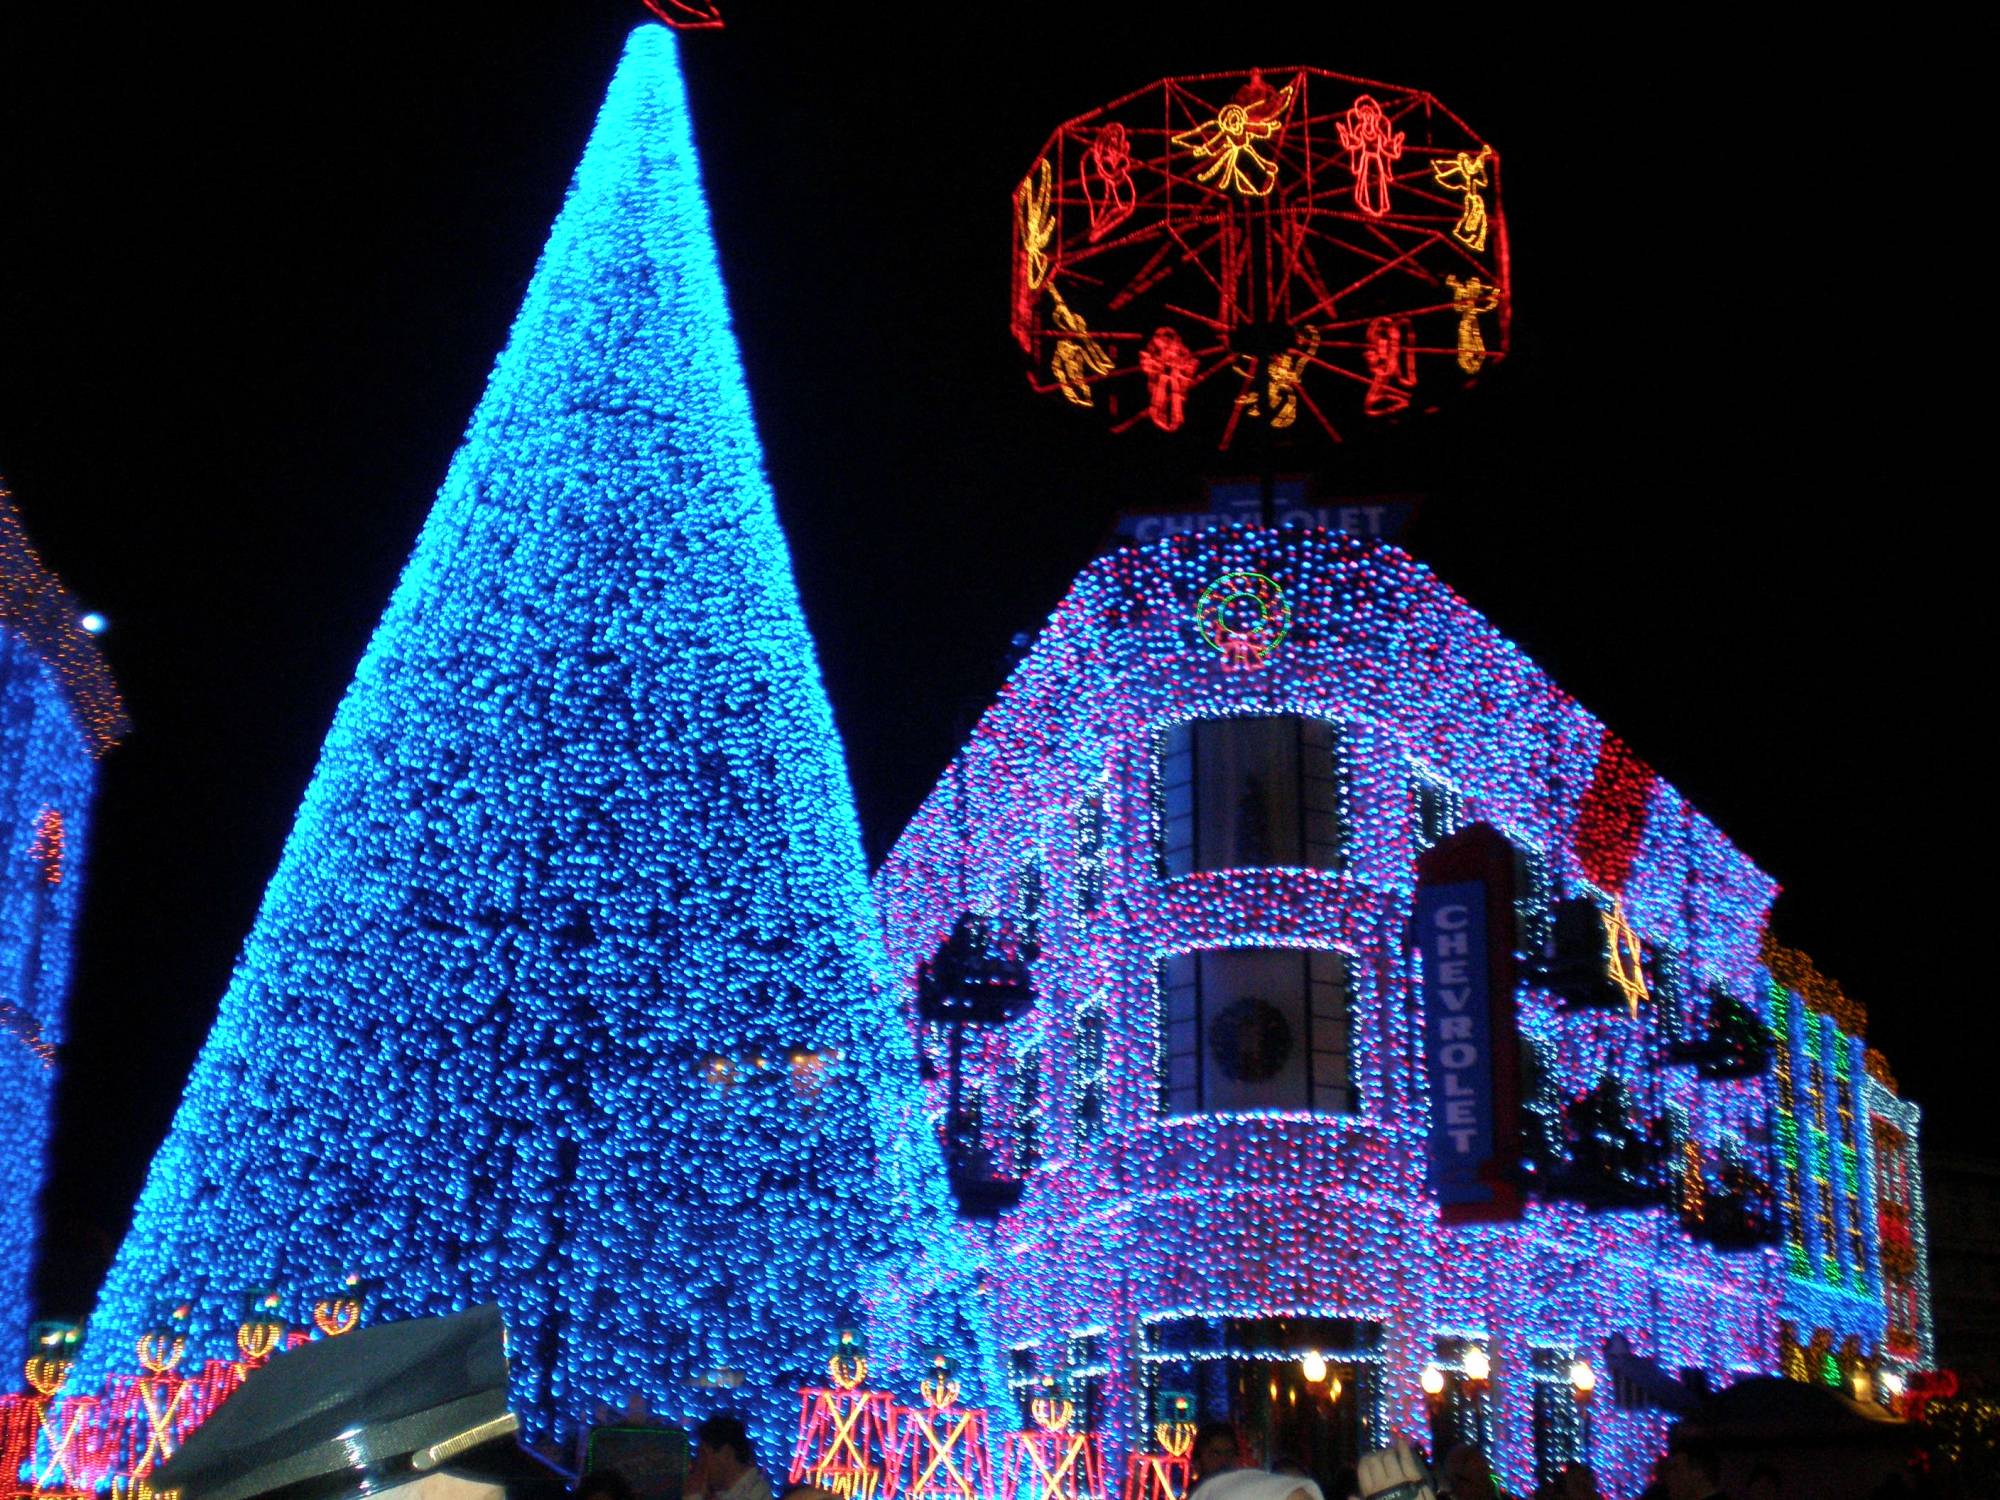 OSBORNE FAMILY SPECTACLE OF DANCING LIGHTS